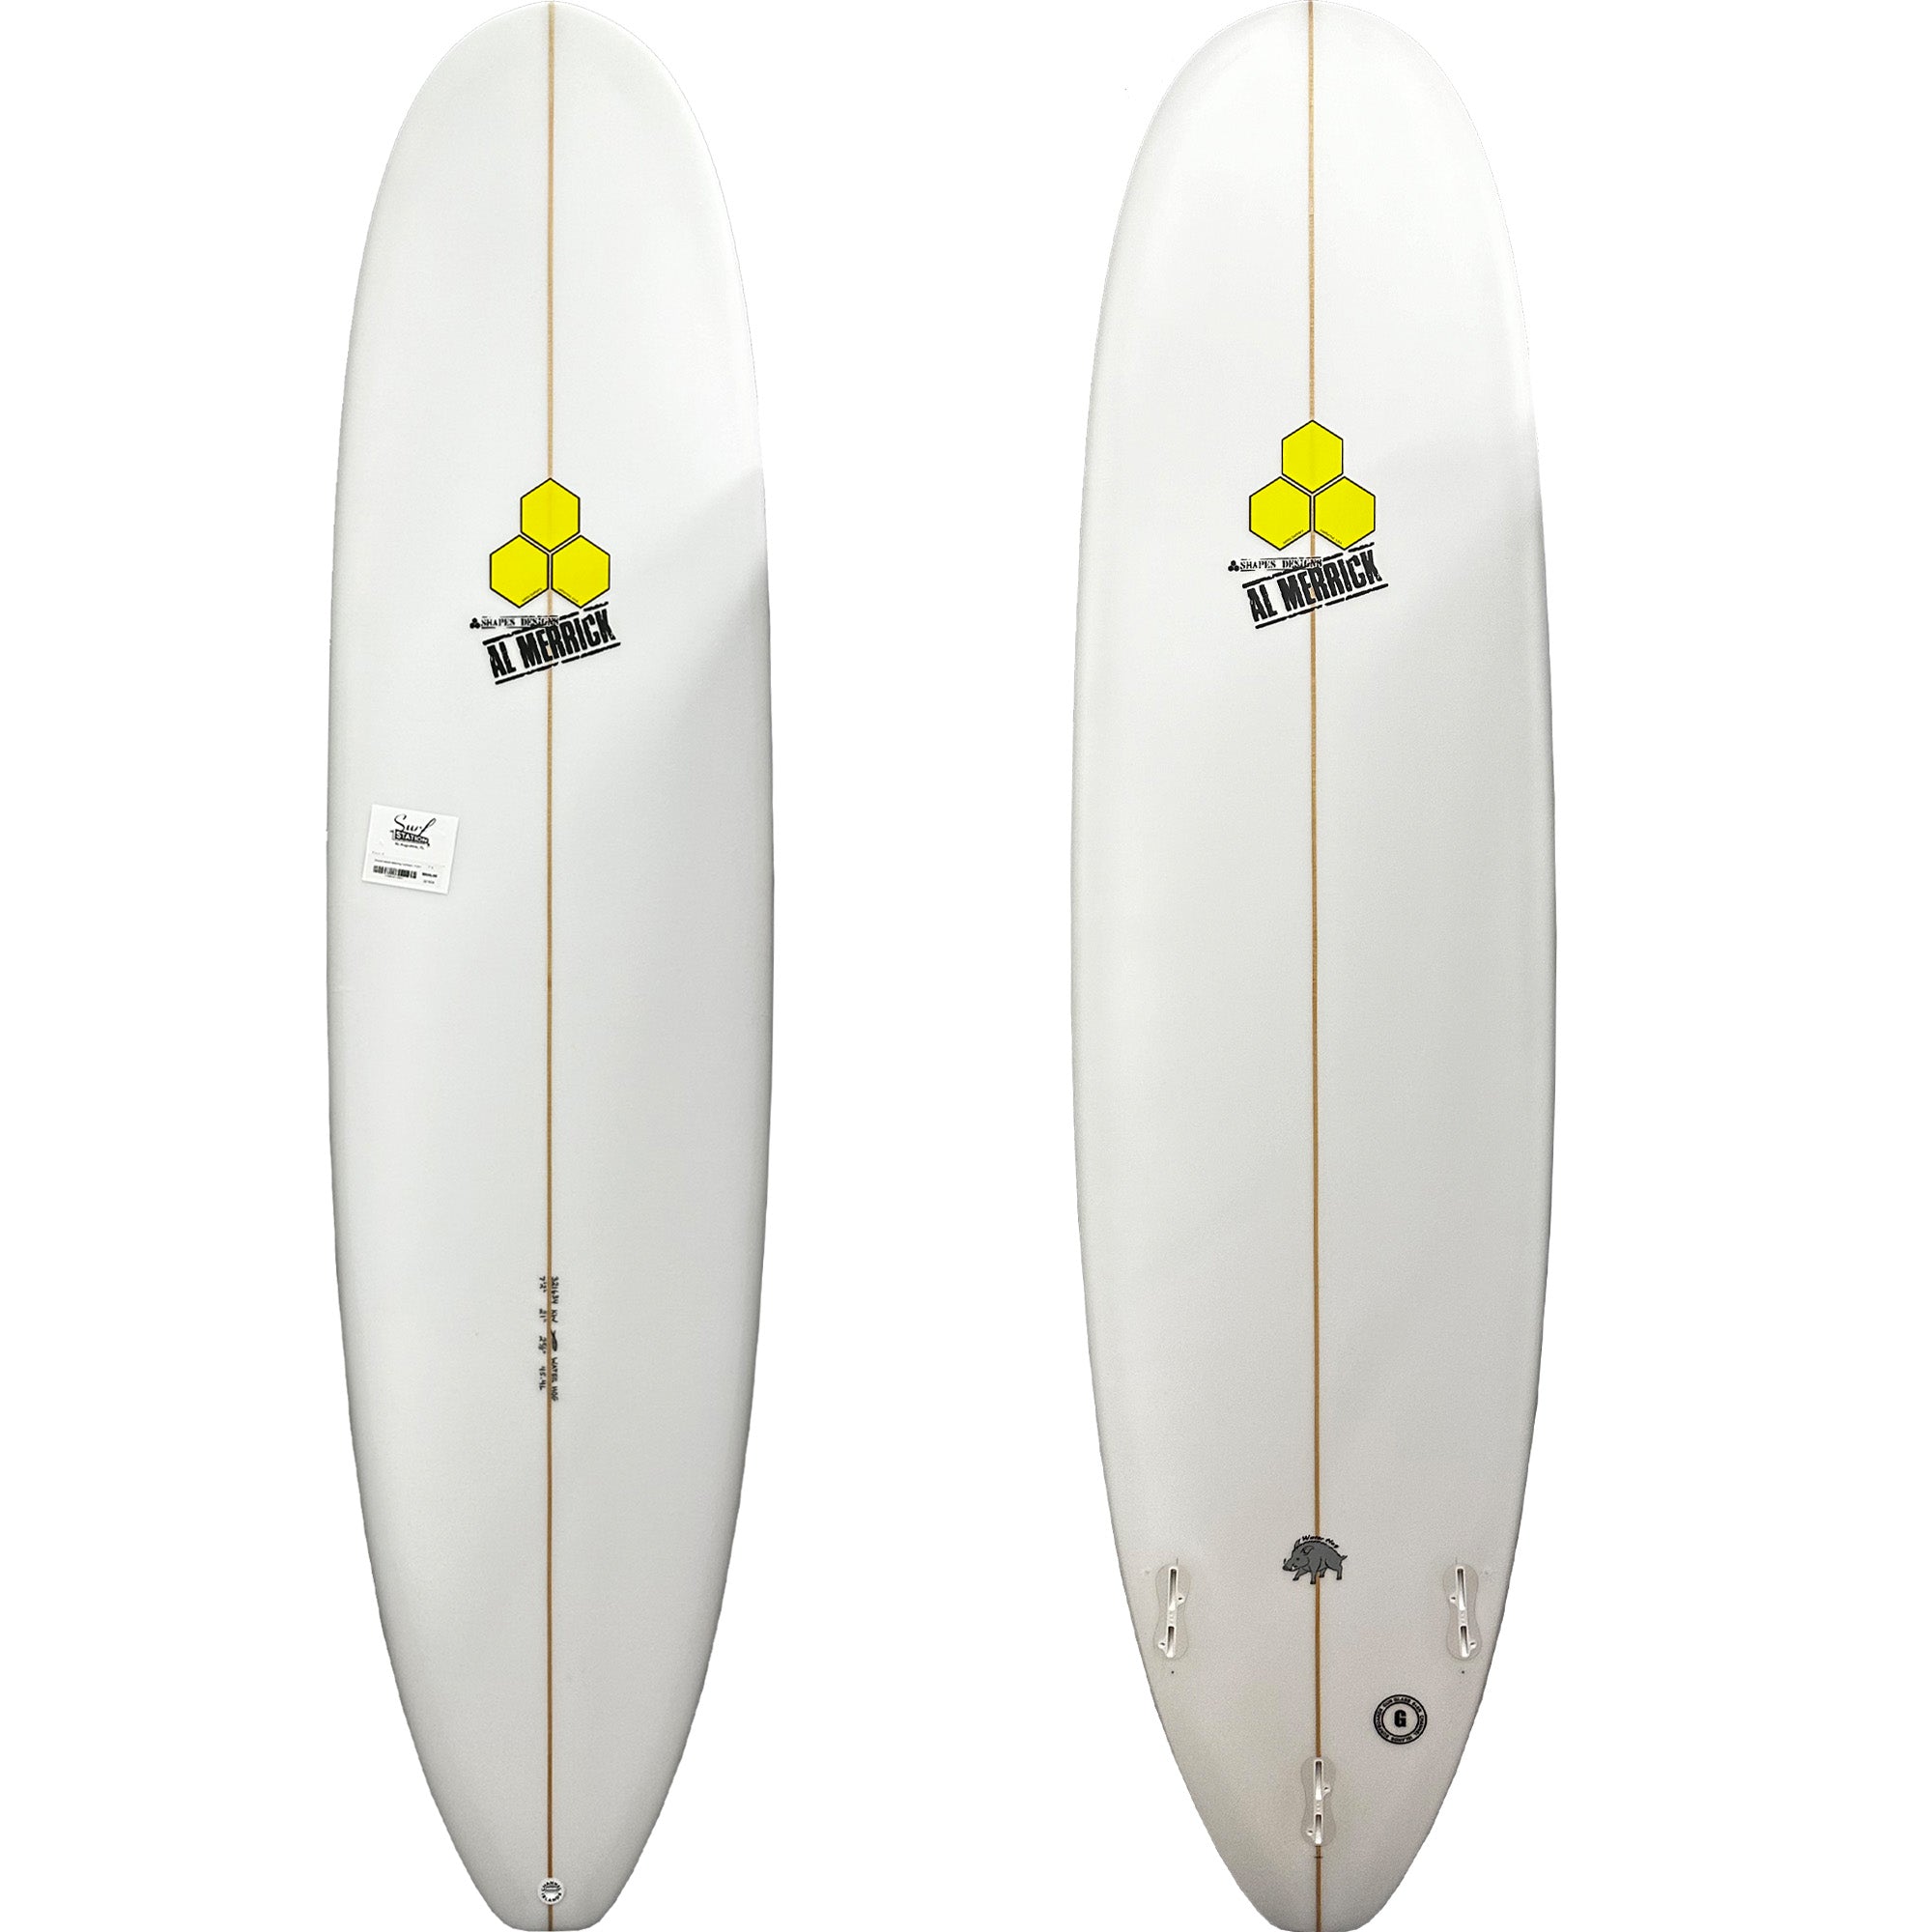 The Water Hog – Channel Islands Surfboards